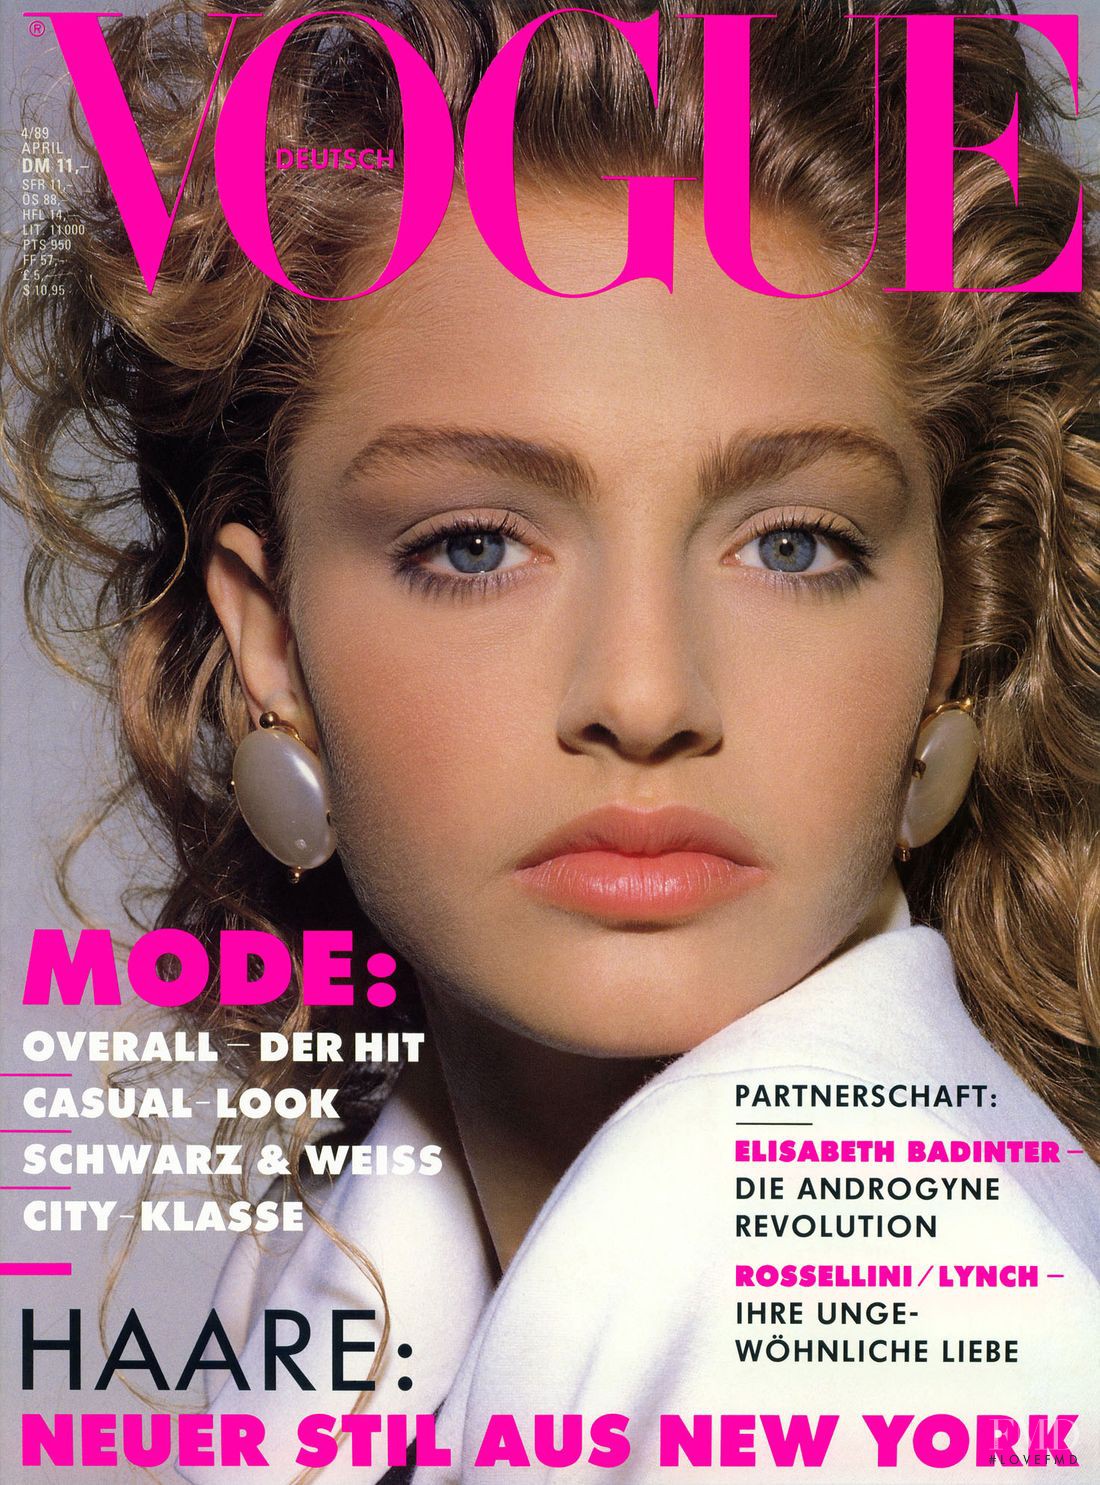 Cover of Vogue Germany with Michaela Bercu, April 1989 (ID:3139 ...